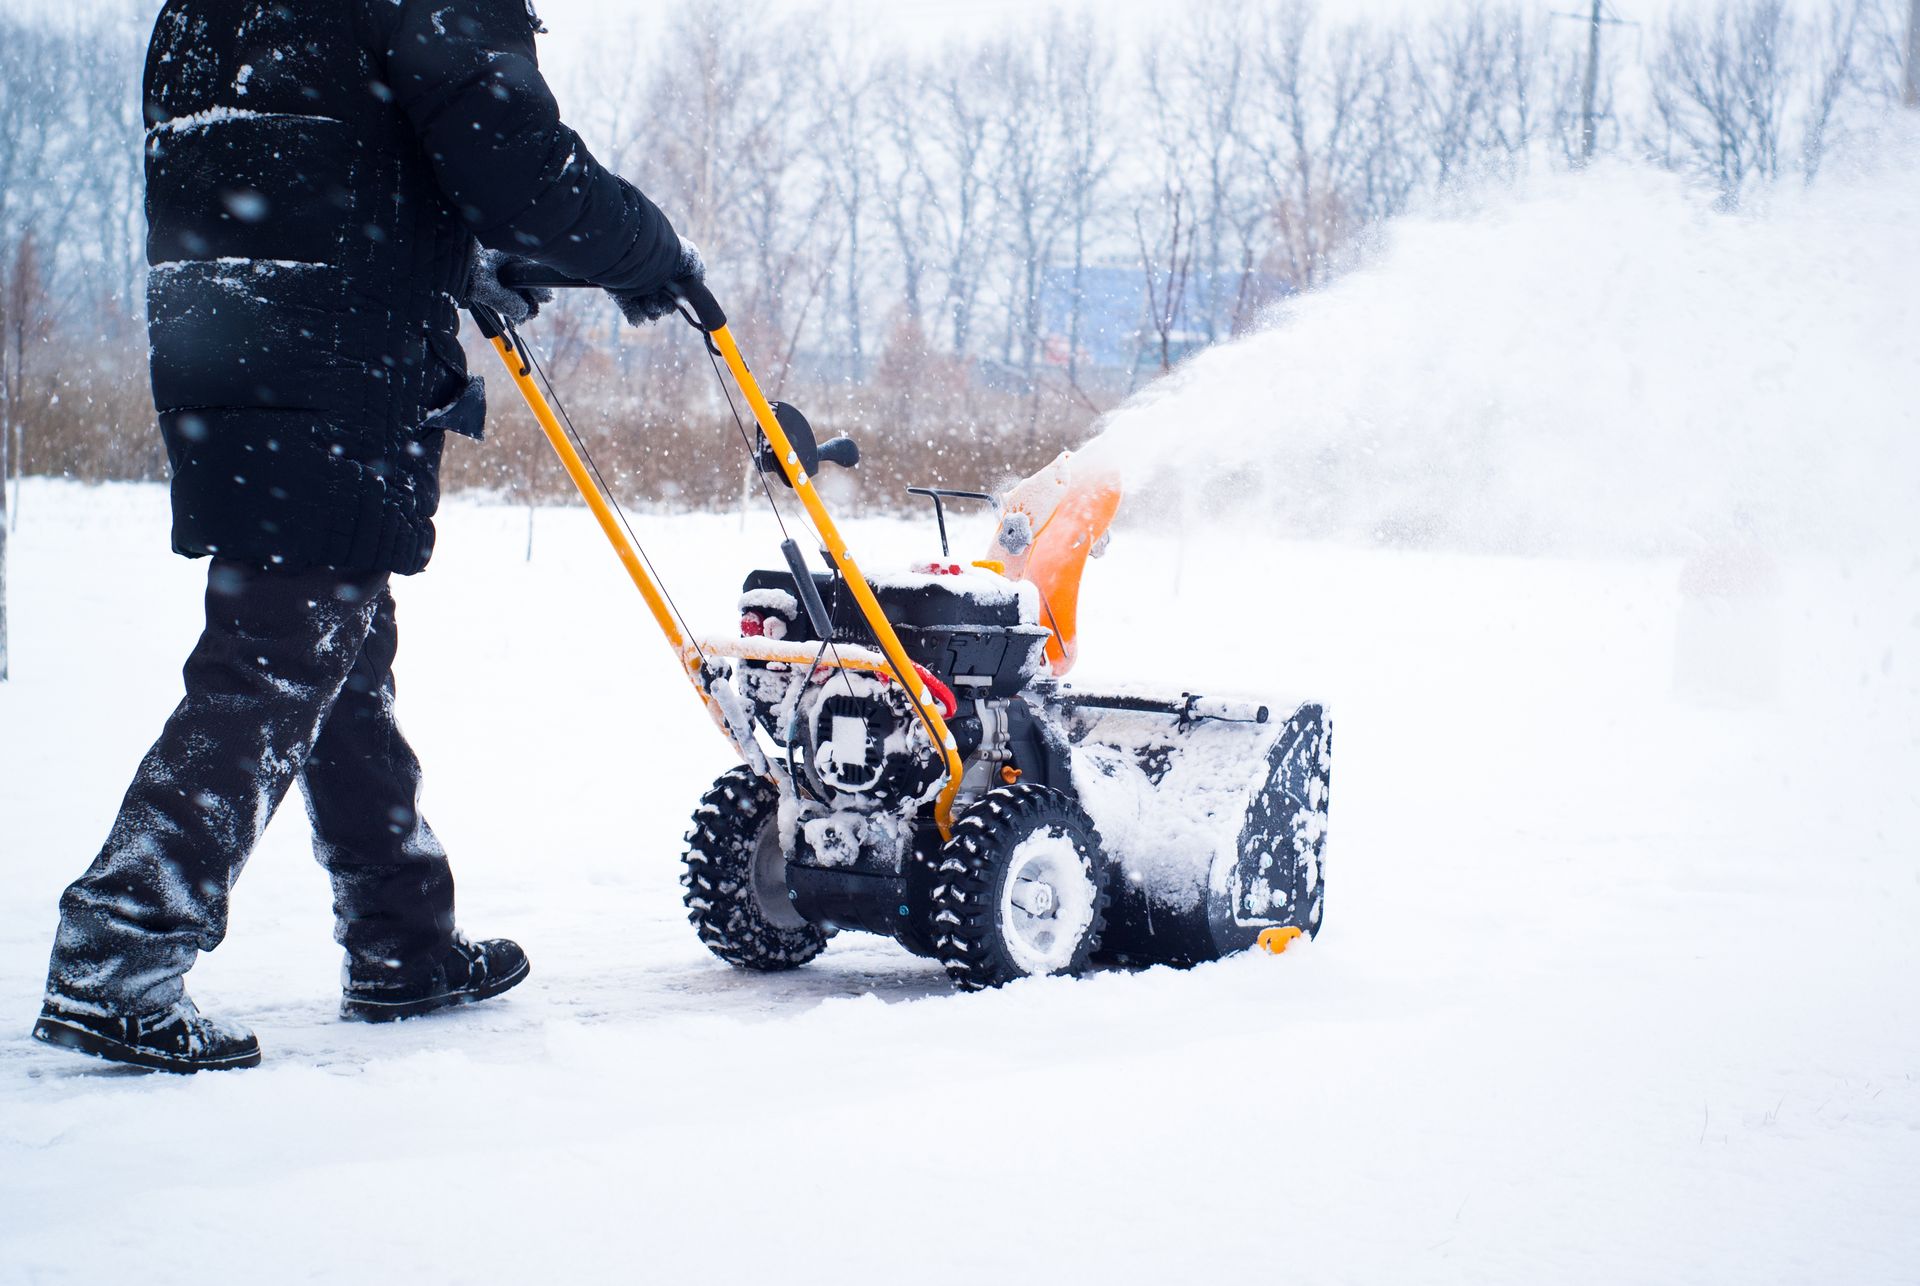 A man operating a snow removal machine clears snow from a sidewalk.